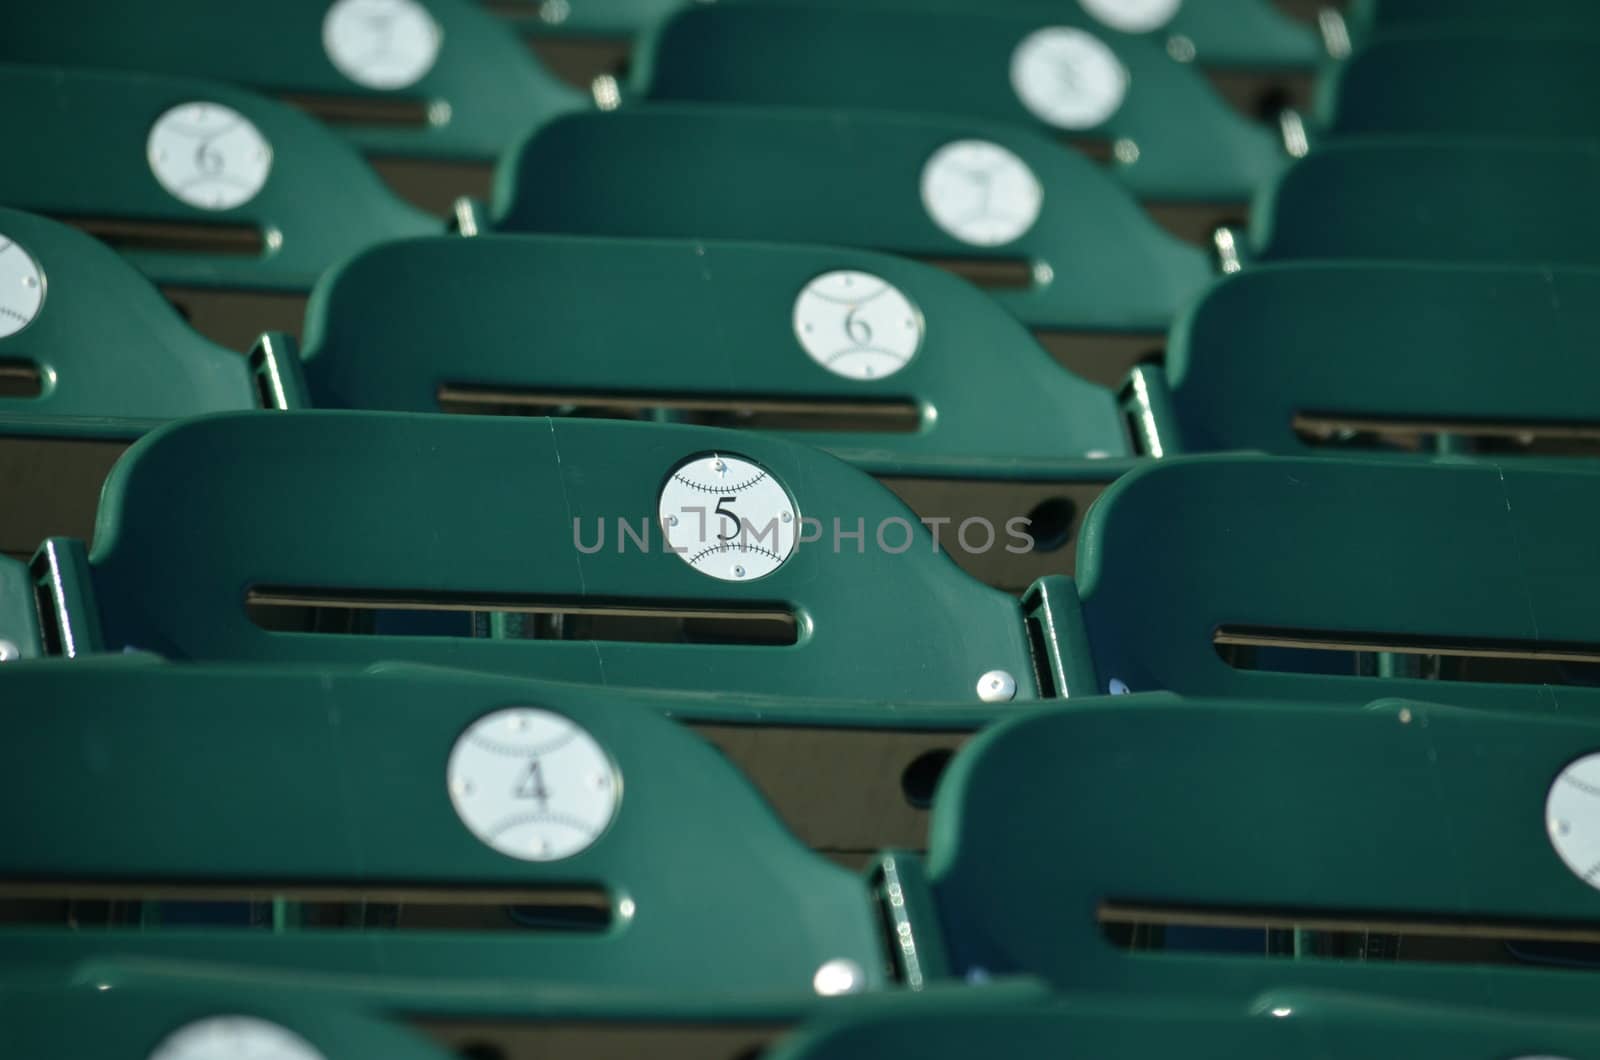 Seats at a baseball stadium ready for fans to sit in.